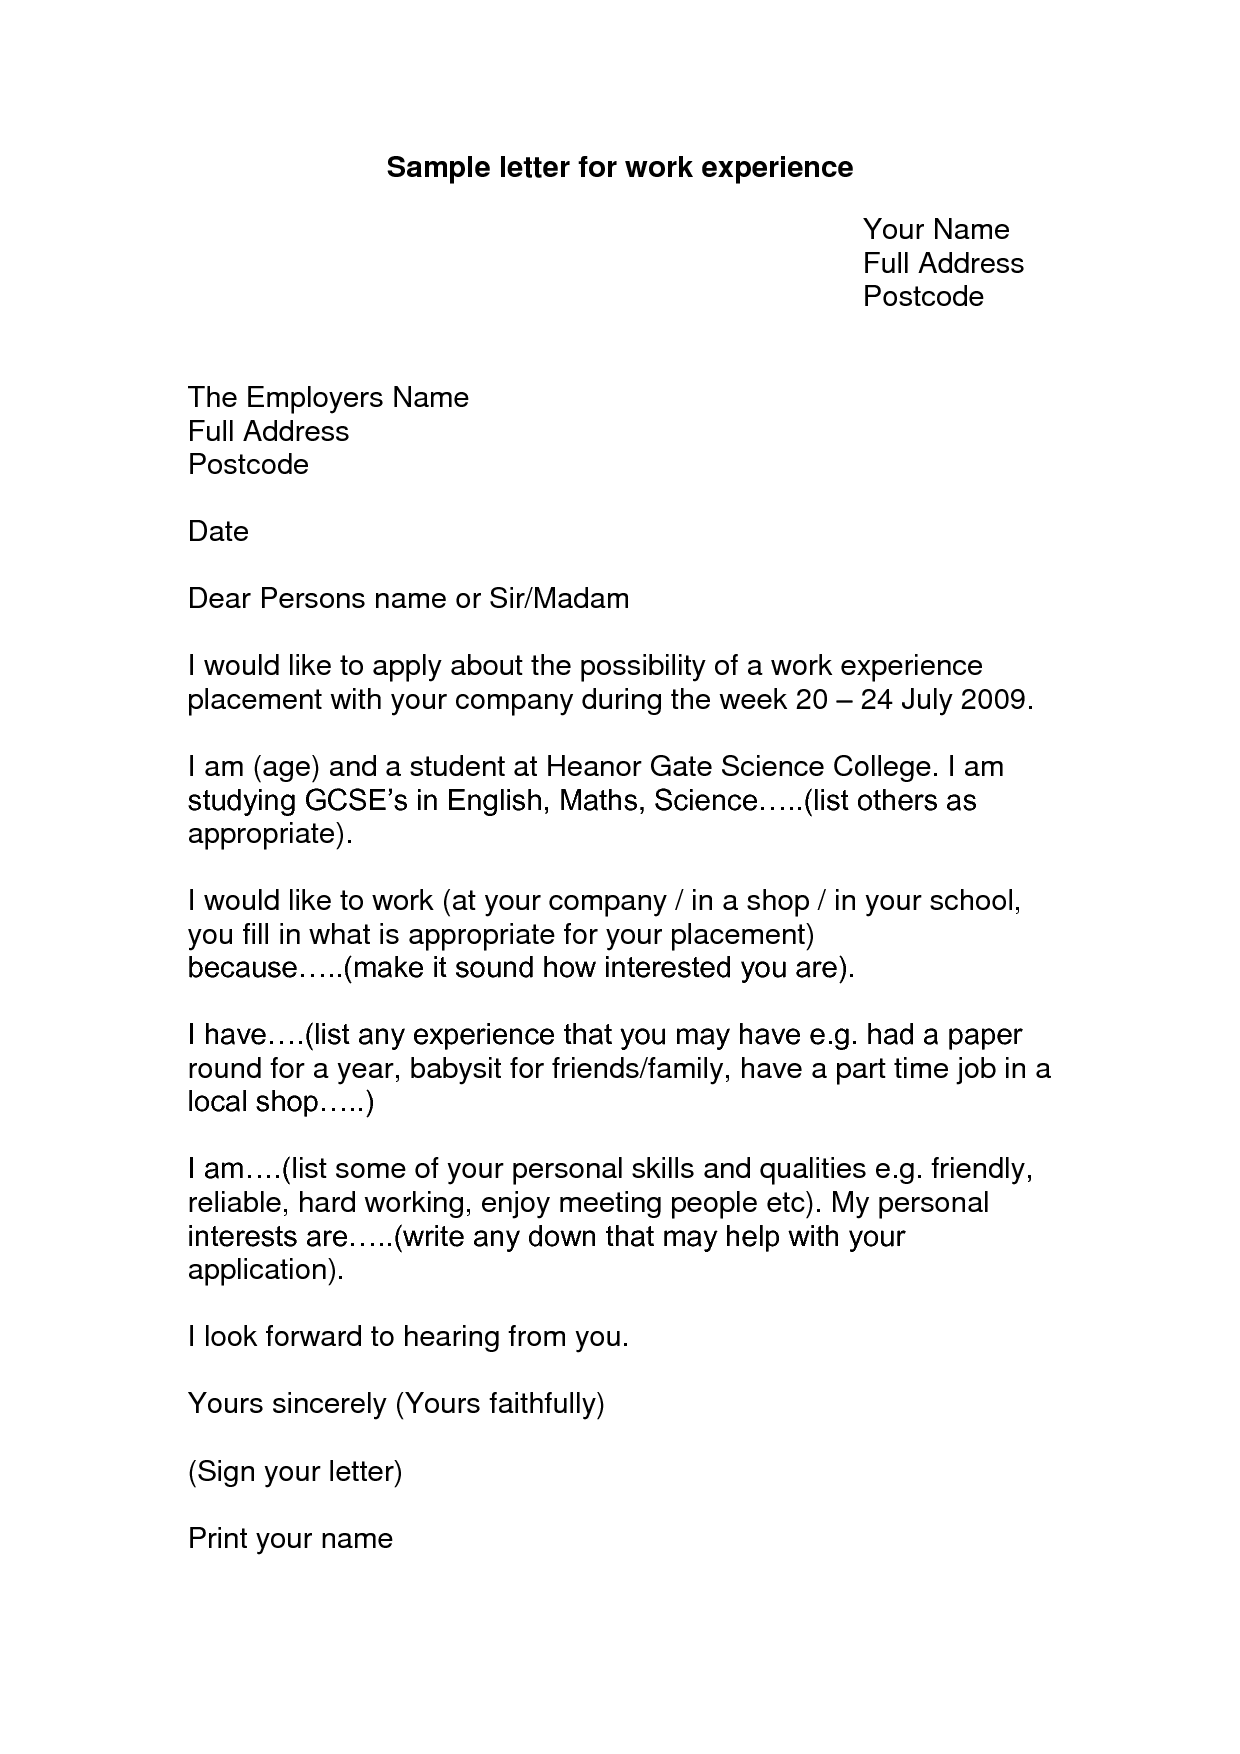 cover letter for work experience placement